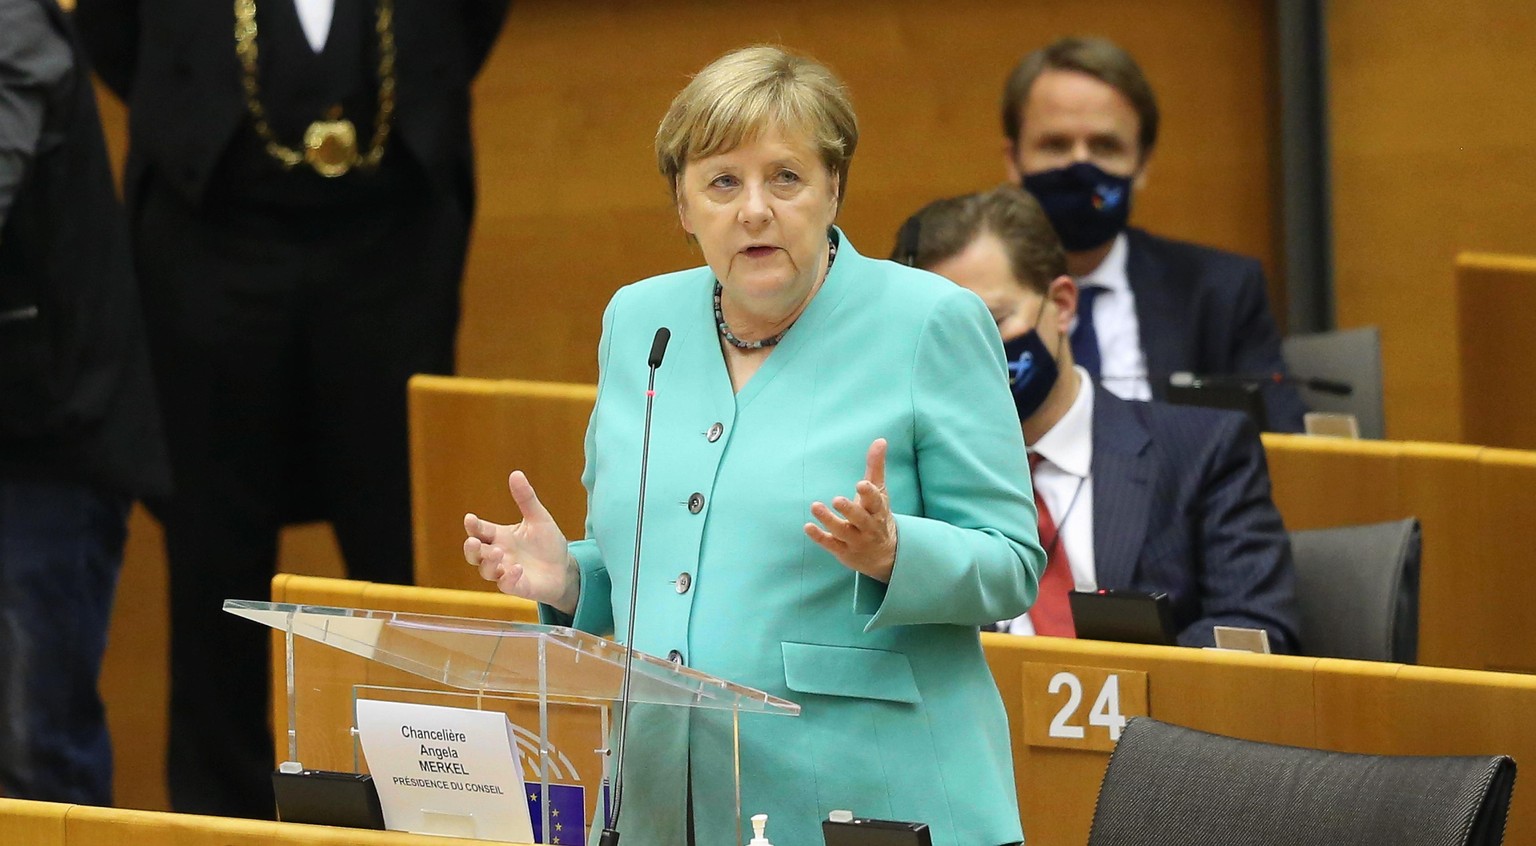 BRUSSELS, BELGIUM - JULY 08: German Chancellor Angela Merkel makes a speech as she attends a plenary session at The European Parliament in Brussels, Belgium on July 8, 2020. Germany holds the term pre ...